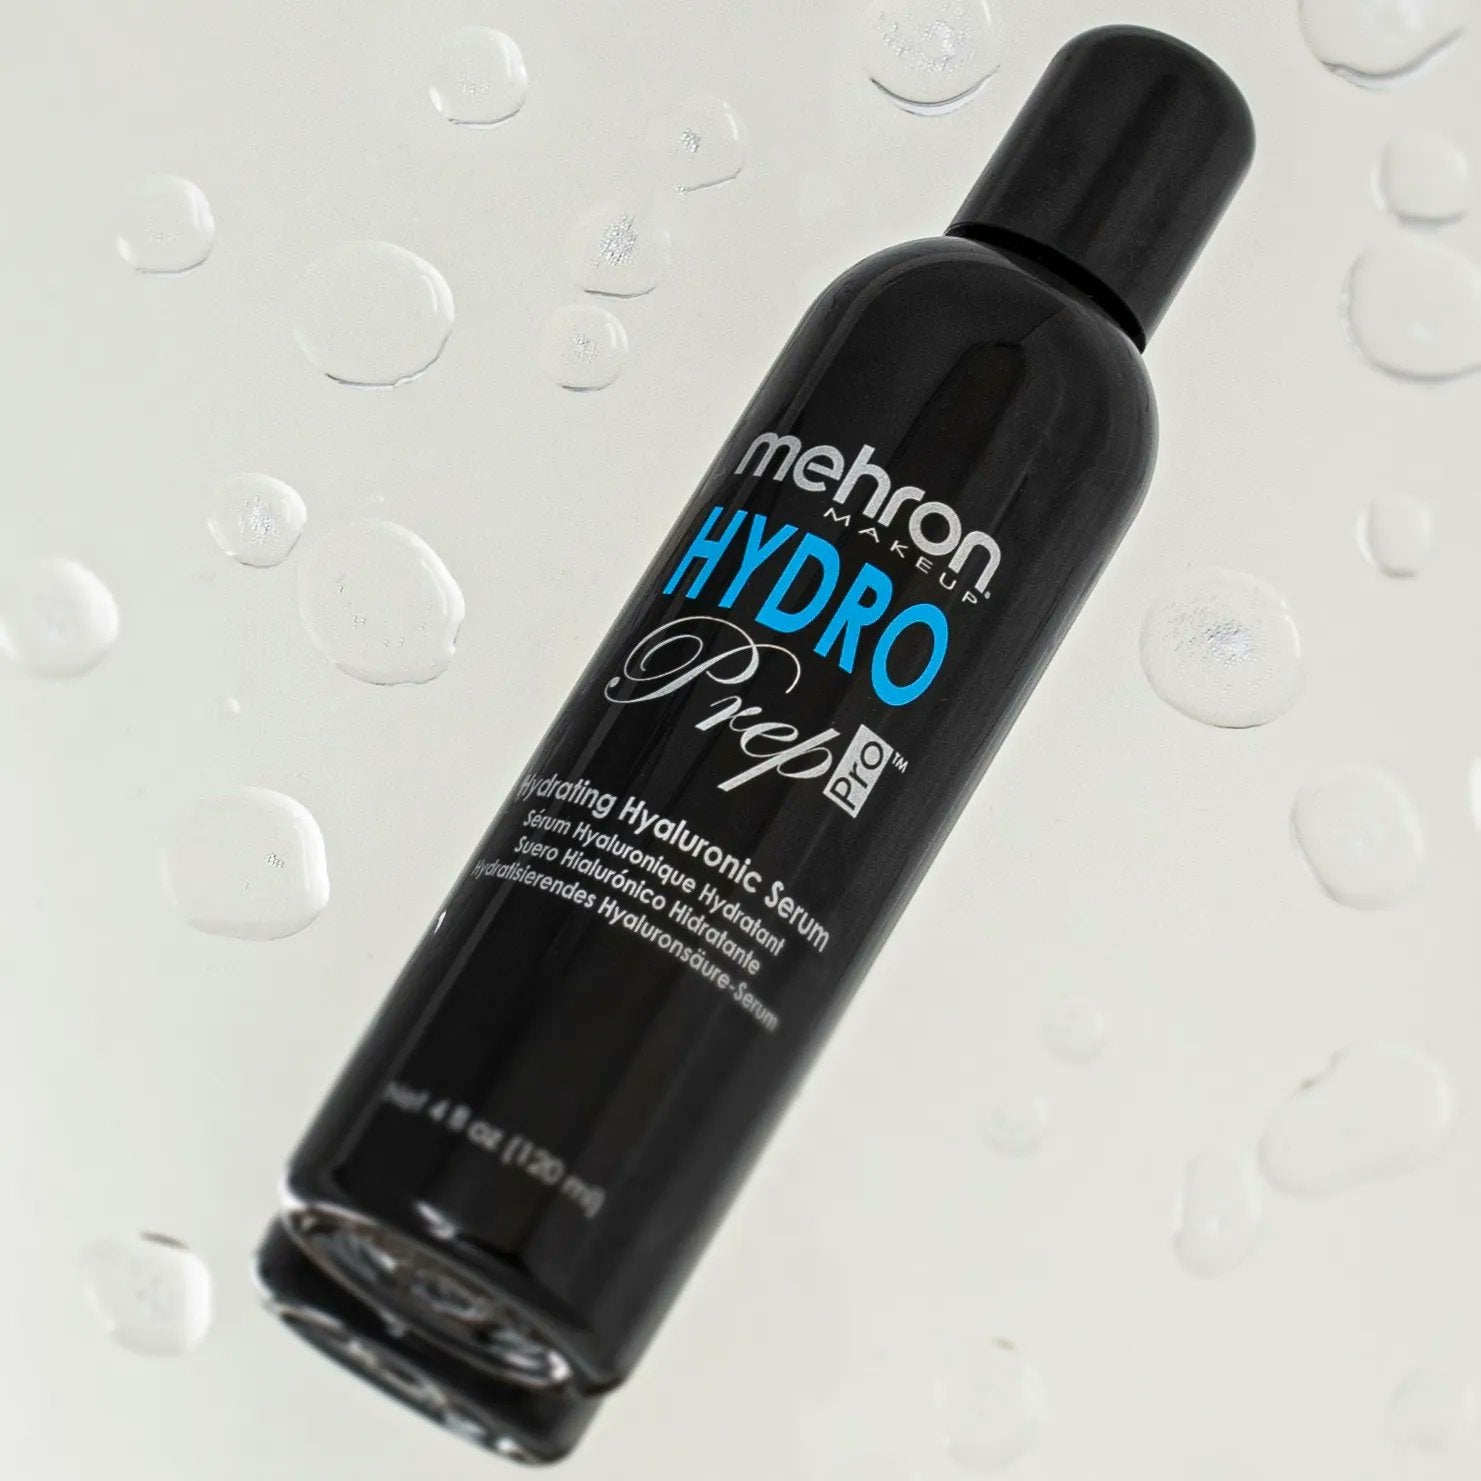  Mehron Hydro Prep Pro Hydrating Hyaluronic Acid Serum, Moisturizing and Hydrating Hyaluronic Face Serum for Face